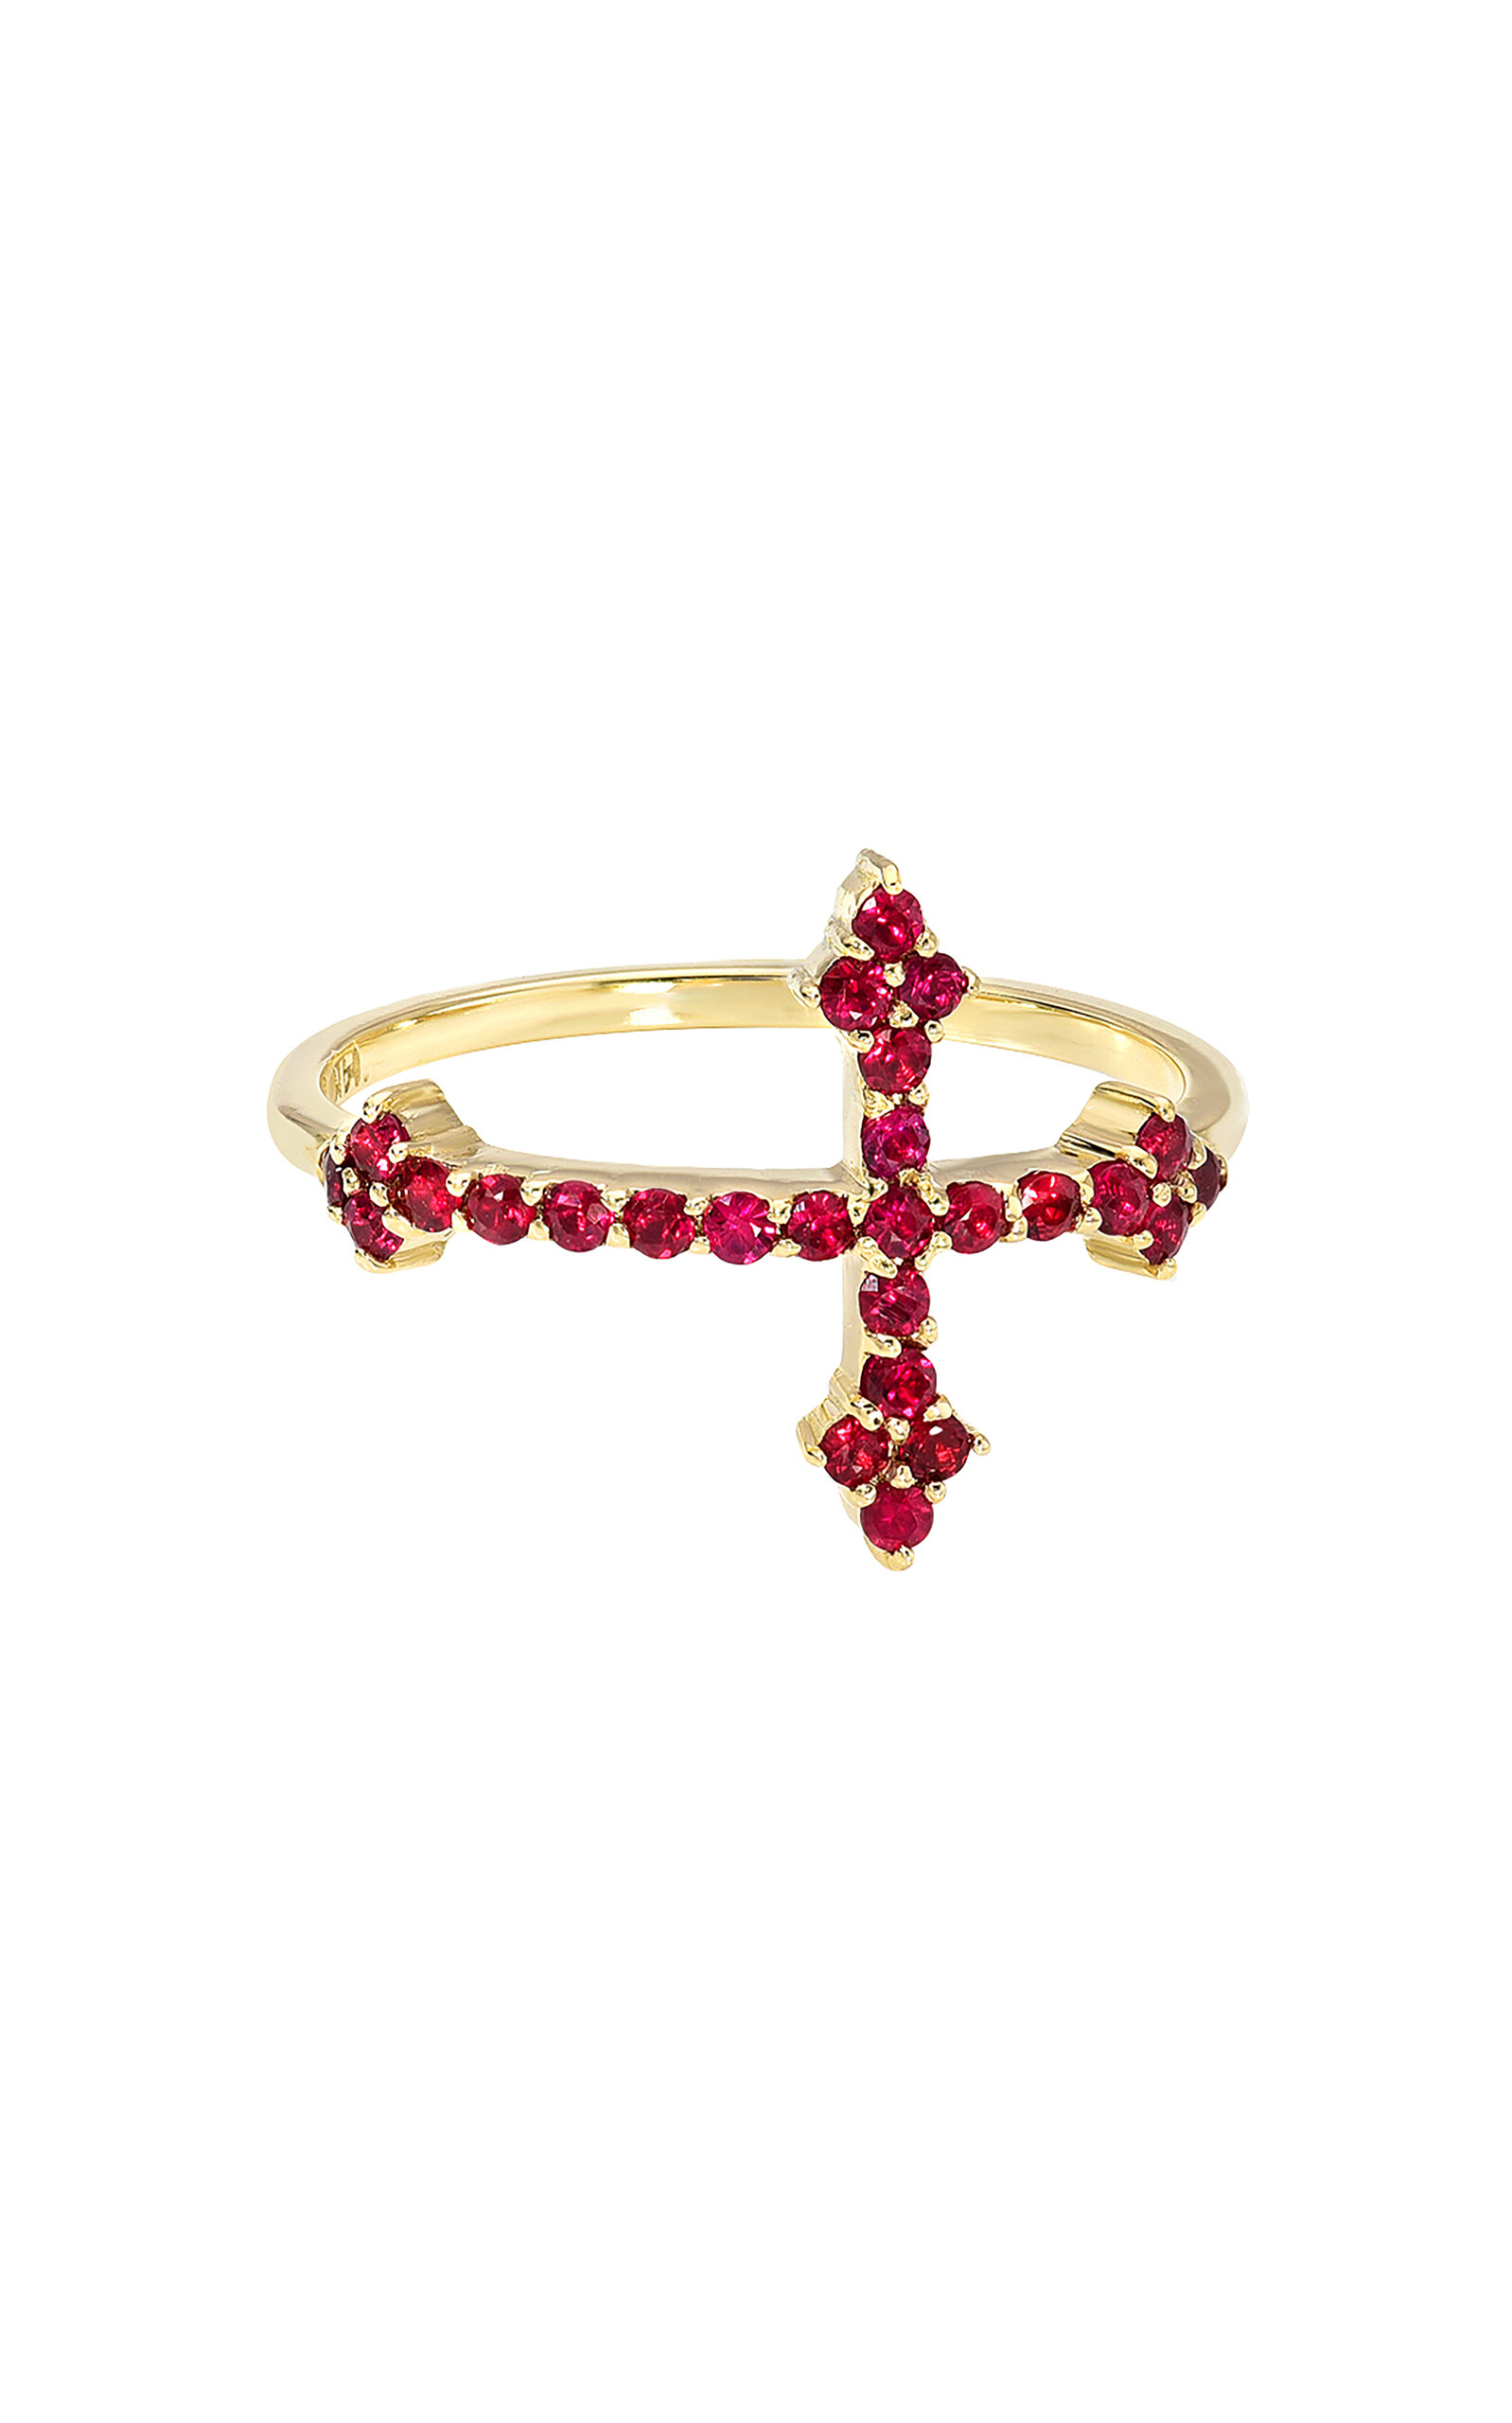 Dru Cross Your Fingers 14k Yellow Gold Ruby Ring In Red